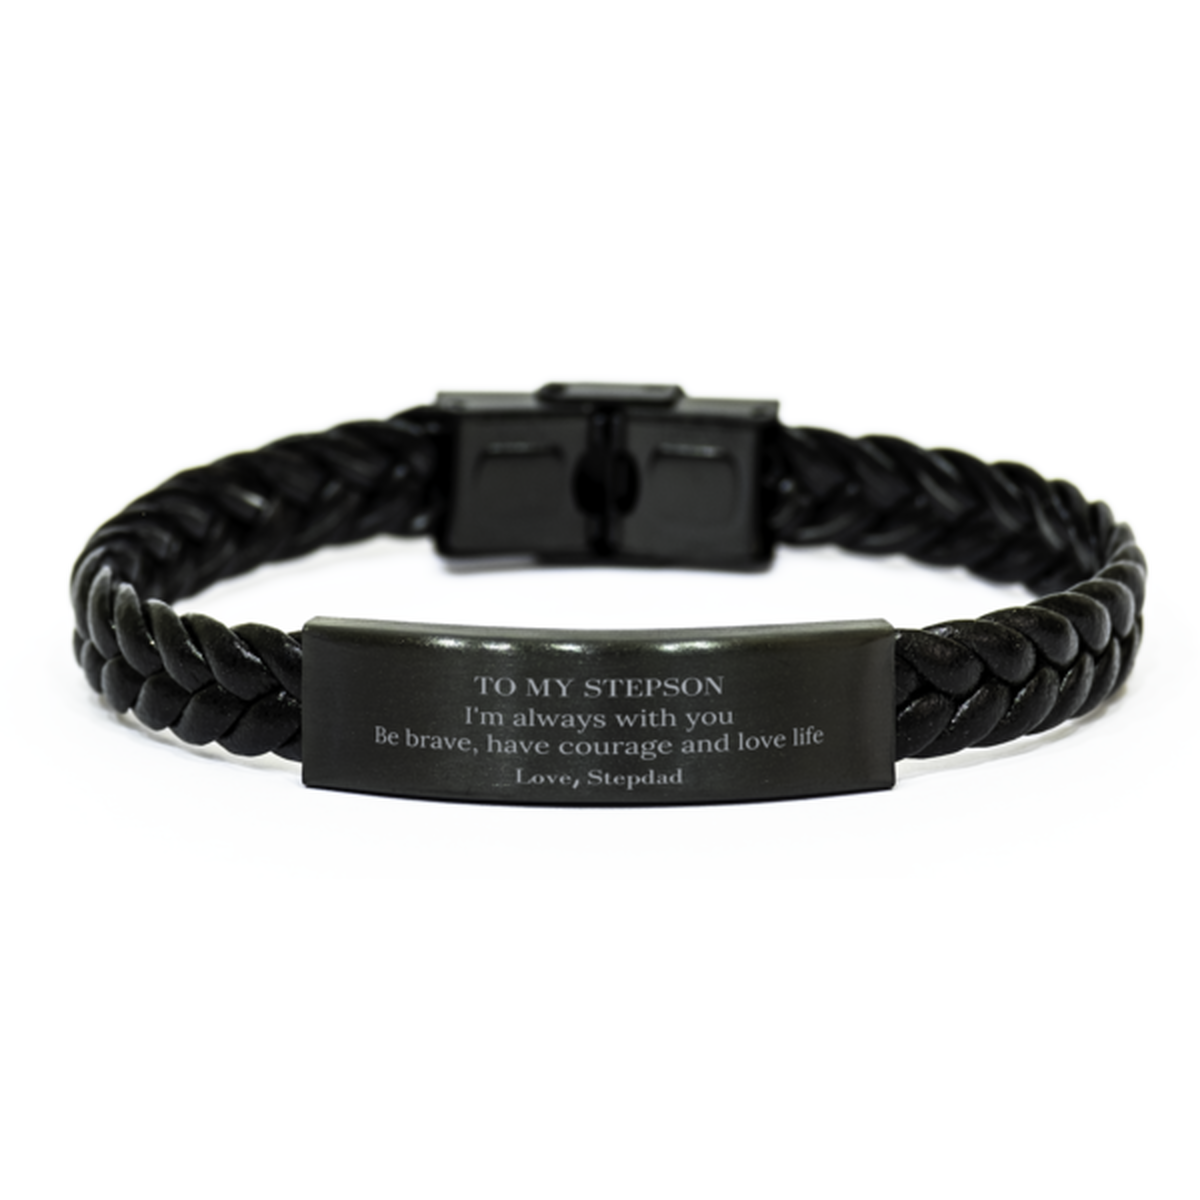 To My Stepson Gifts from Stepdad, Unique Braided Leather Bracelet Inspirational Christmas Birthday Graduation Gifts for Stepson I'm always with you. Be brave, have courage and love life. Love, Stepdad